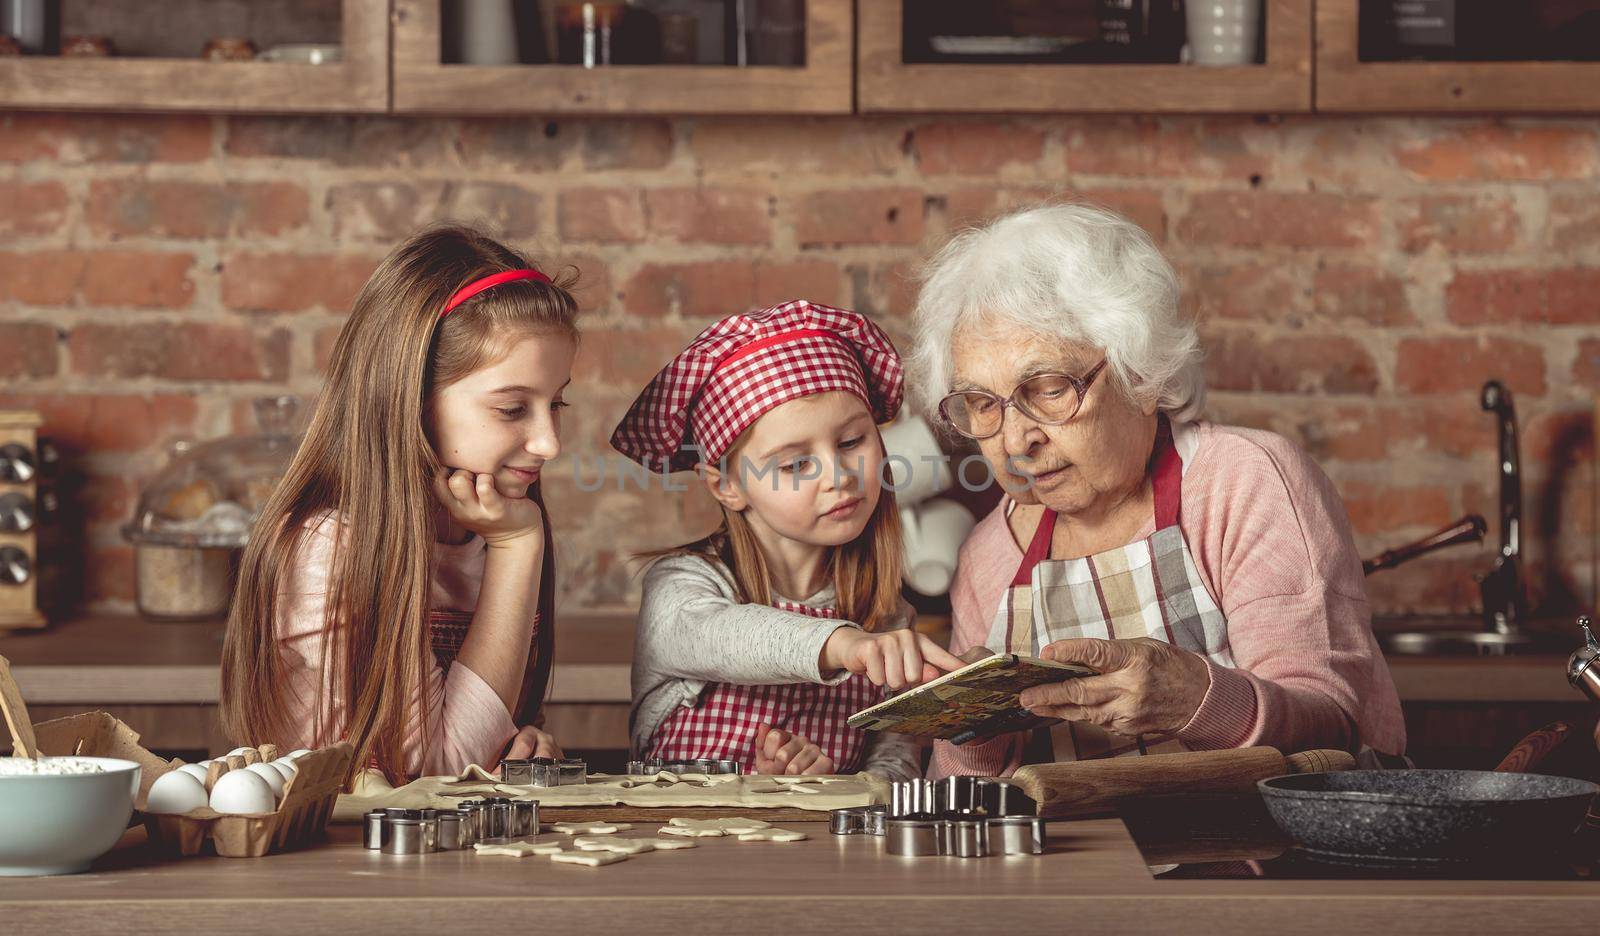 Grandma and granddaughters are spreading dough using a rolling pin